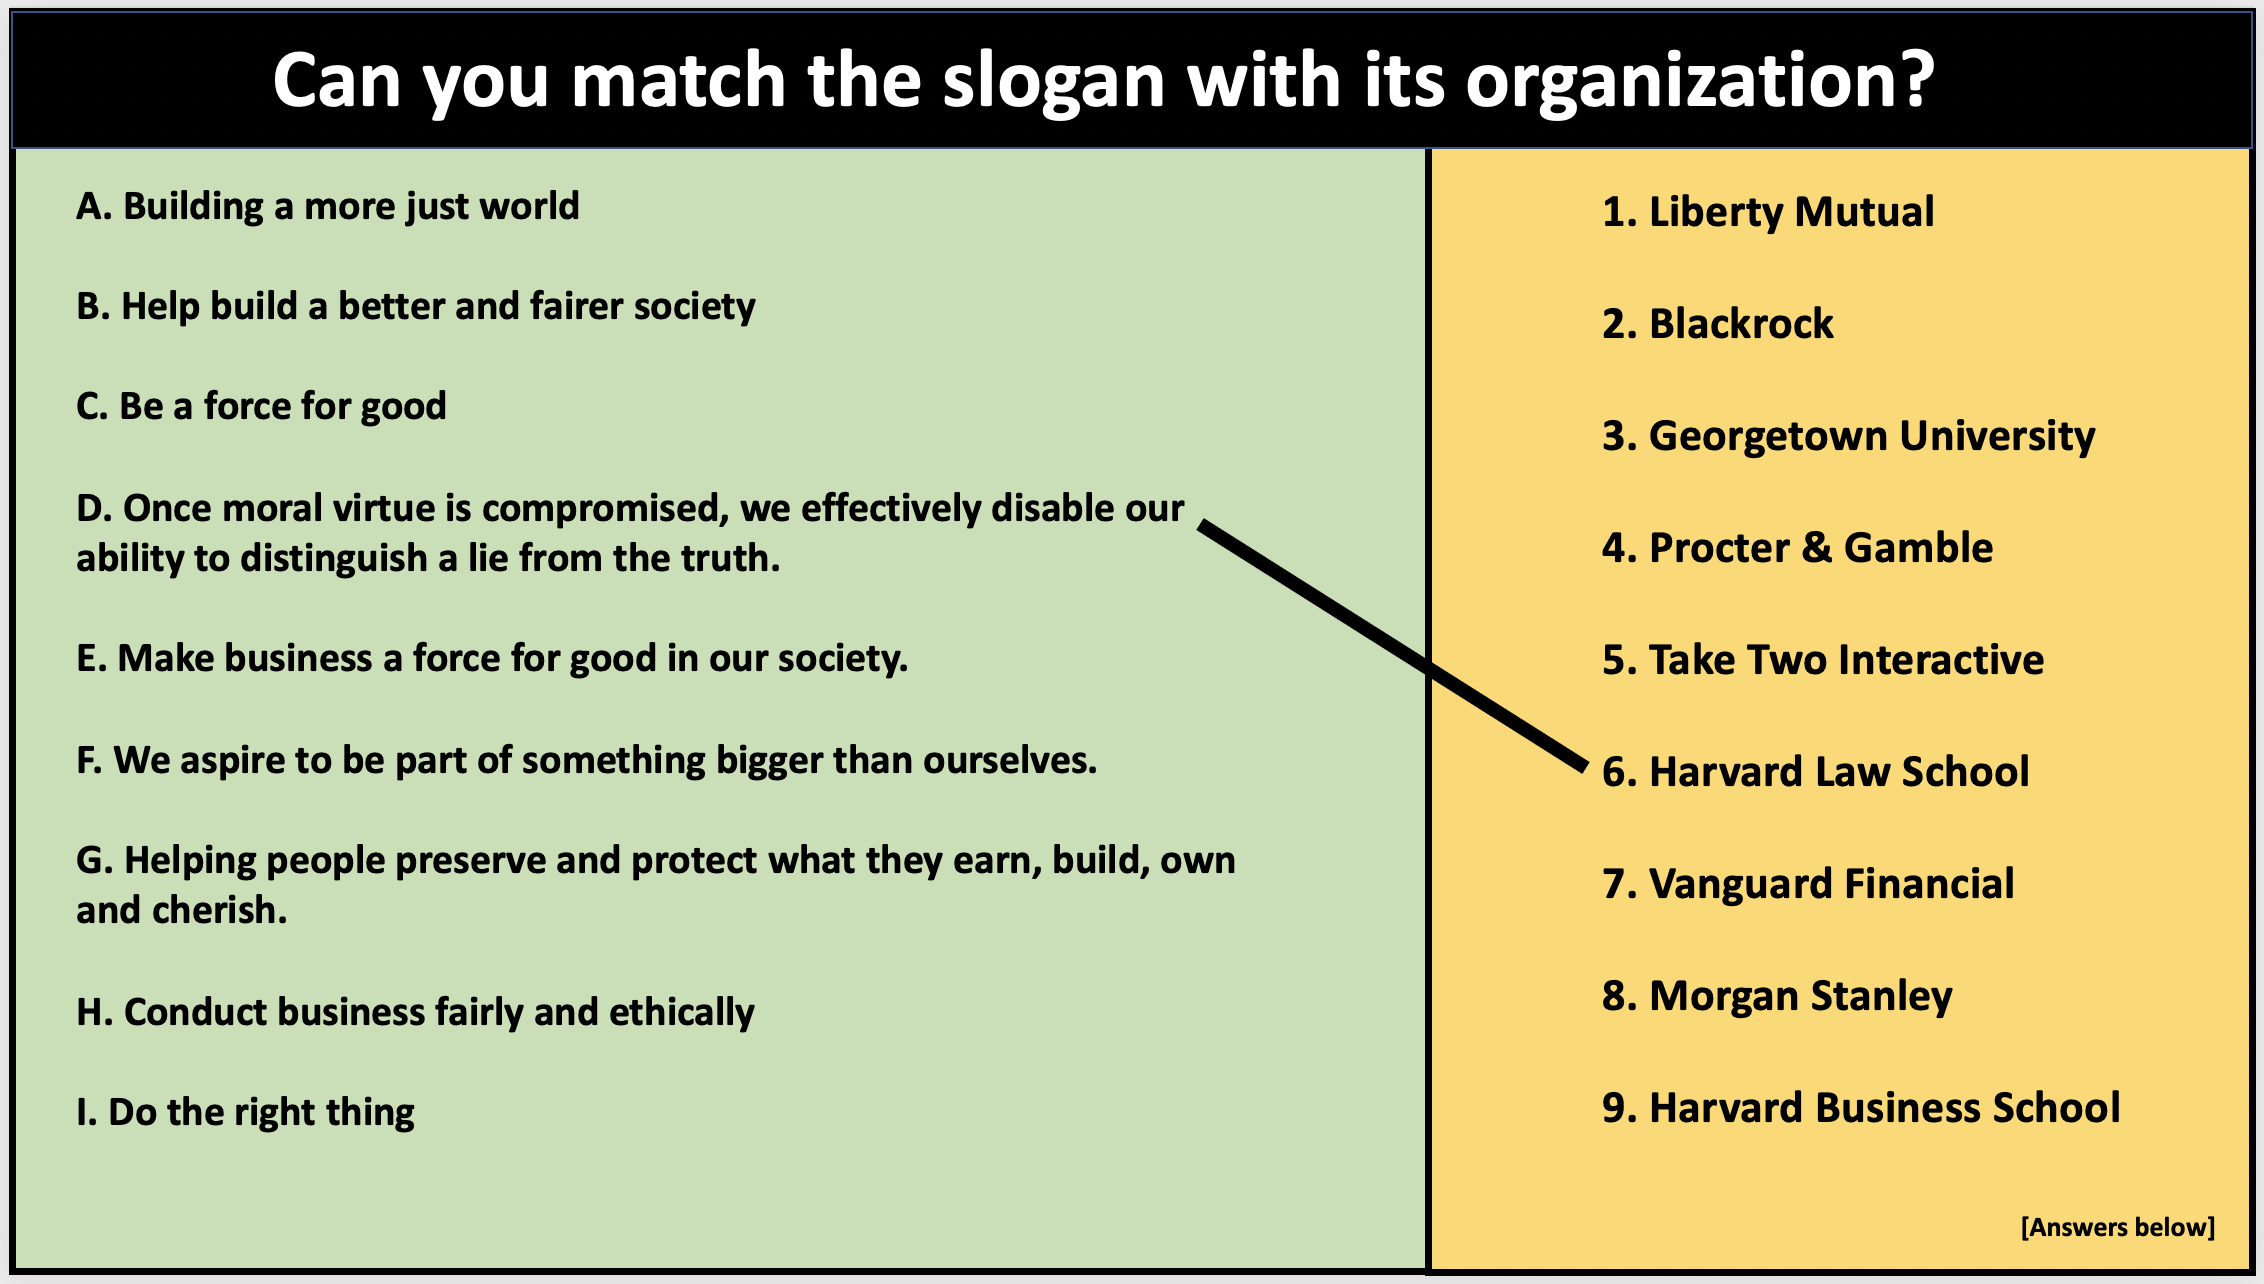 Corporations often use one set of marketing slogans, but practice a different set of values.